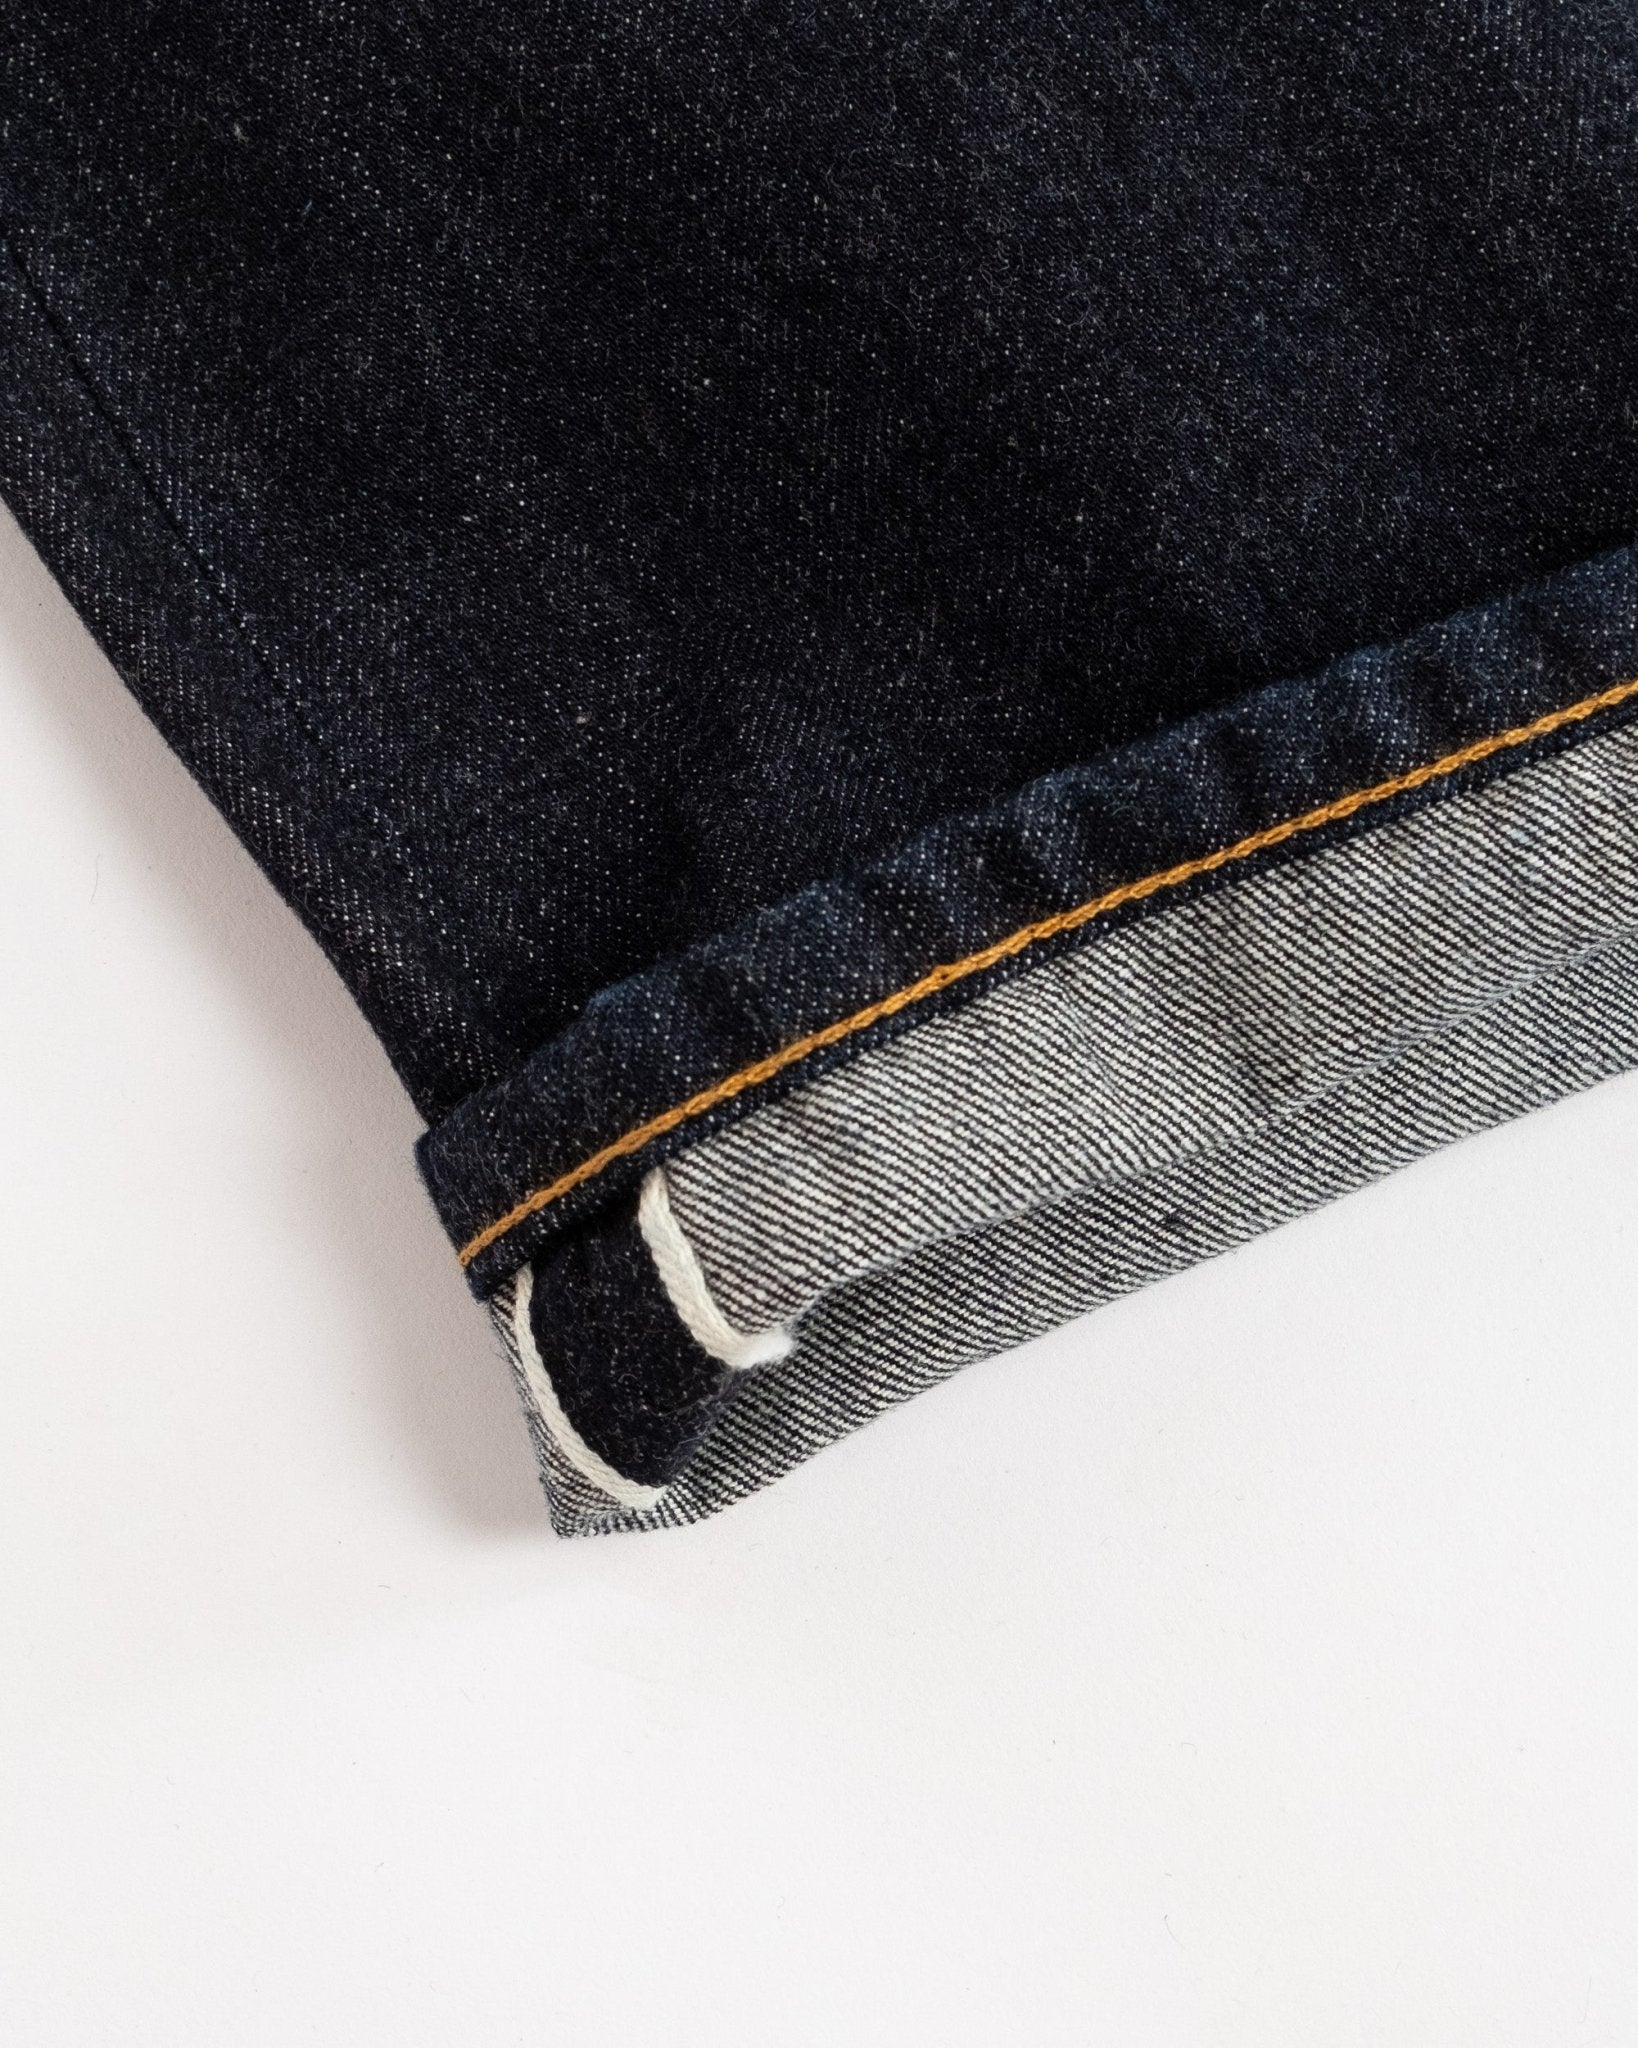 Rad Rufus Rinse Ruby Selvage - Meadow